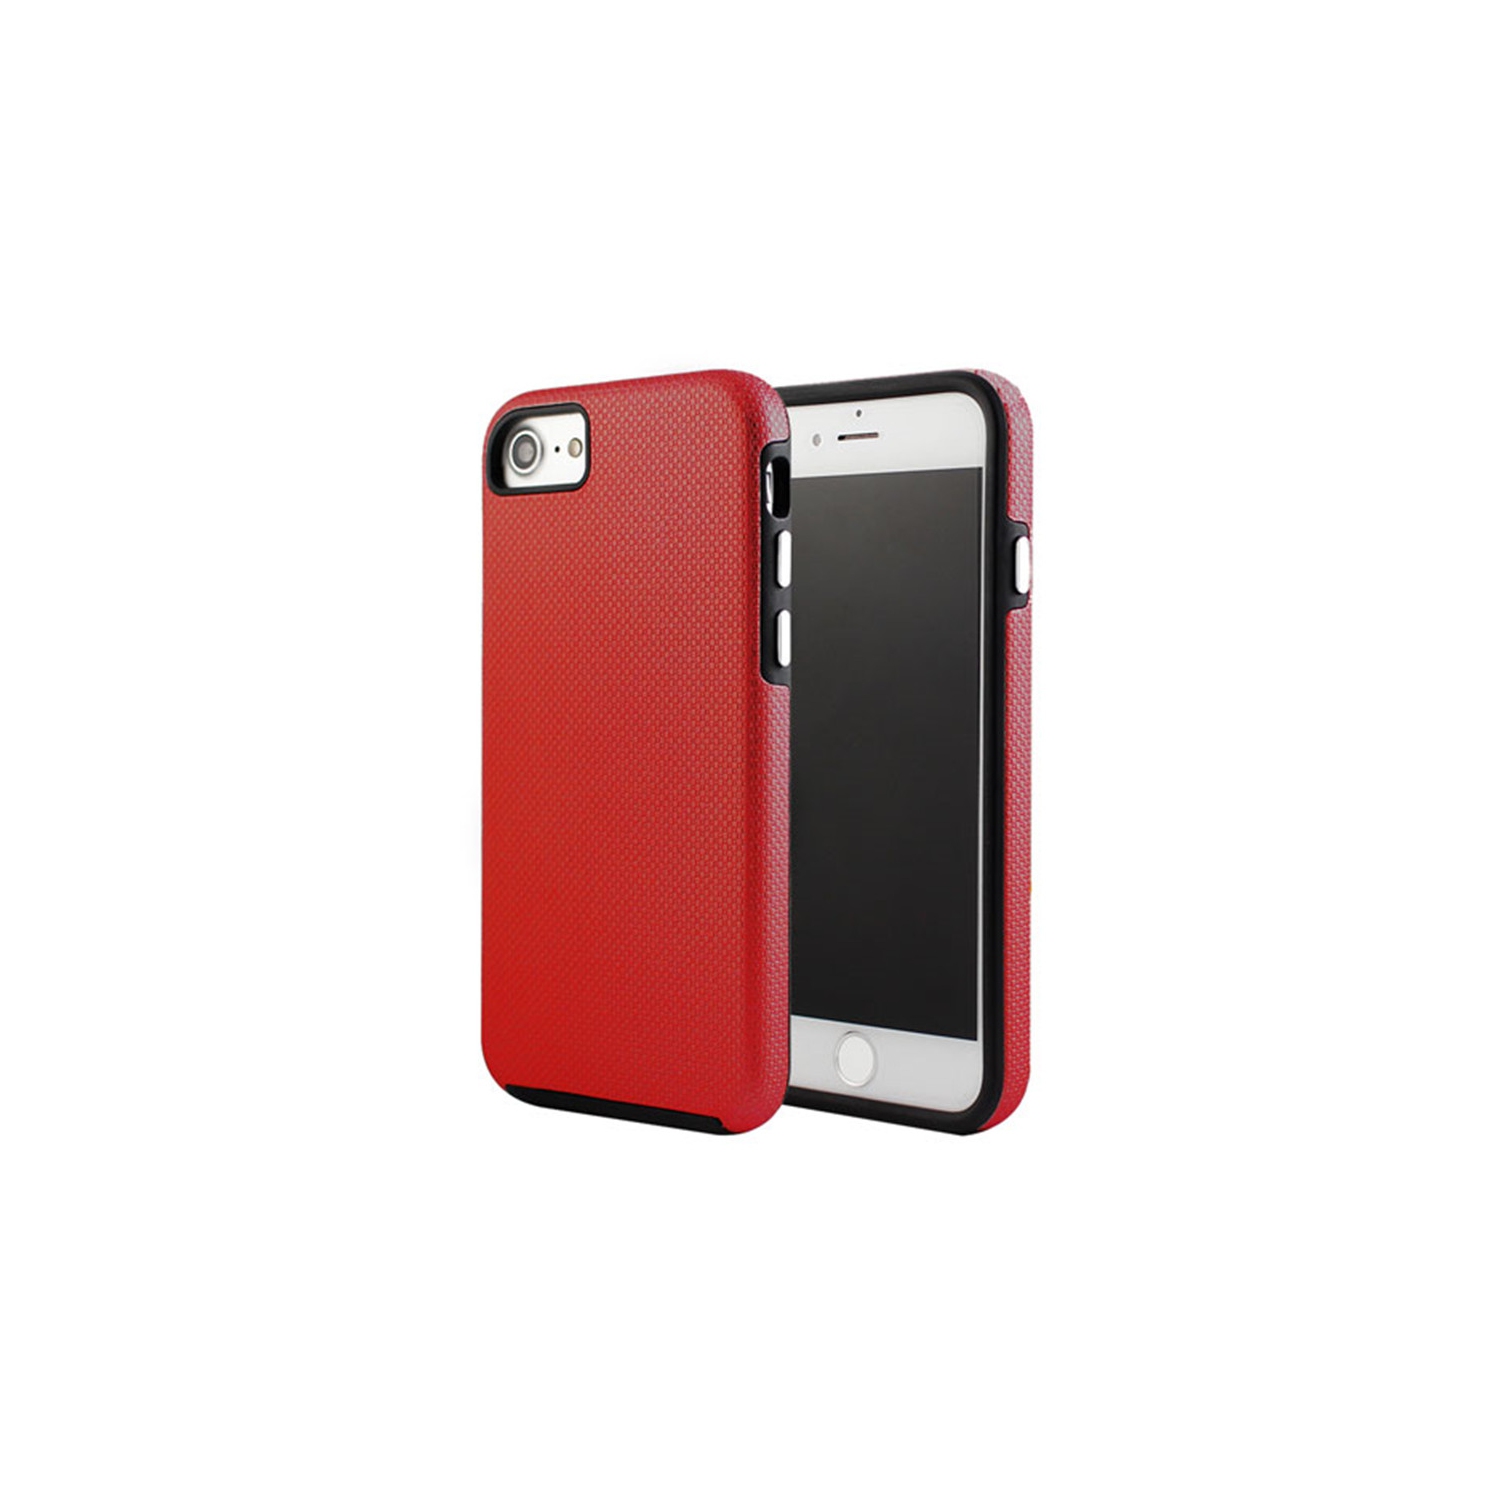 【CSmart】 Slim Fitted Hybrid Hard PC Shell Shockproof Scratch Resistant Case Cover for iPhone 7 Plus / 8 Plus (5.5"), Red